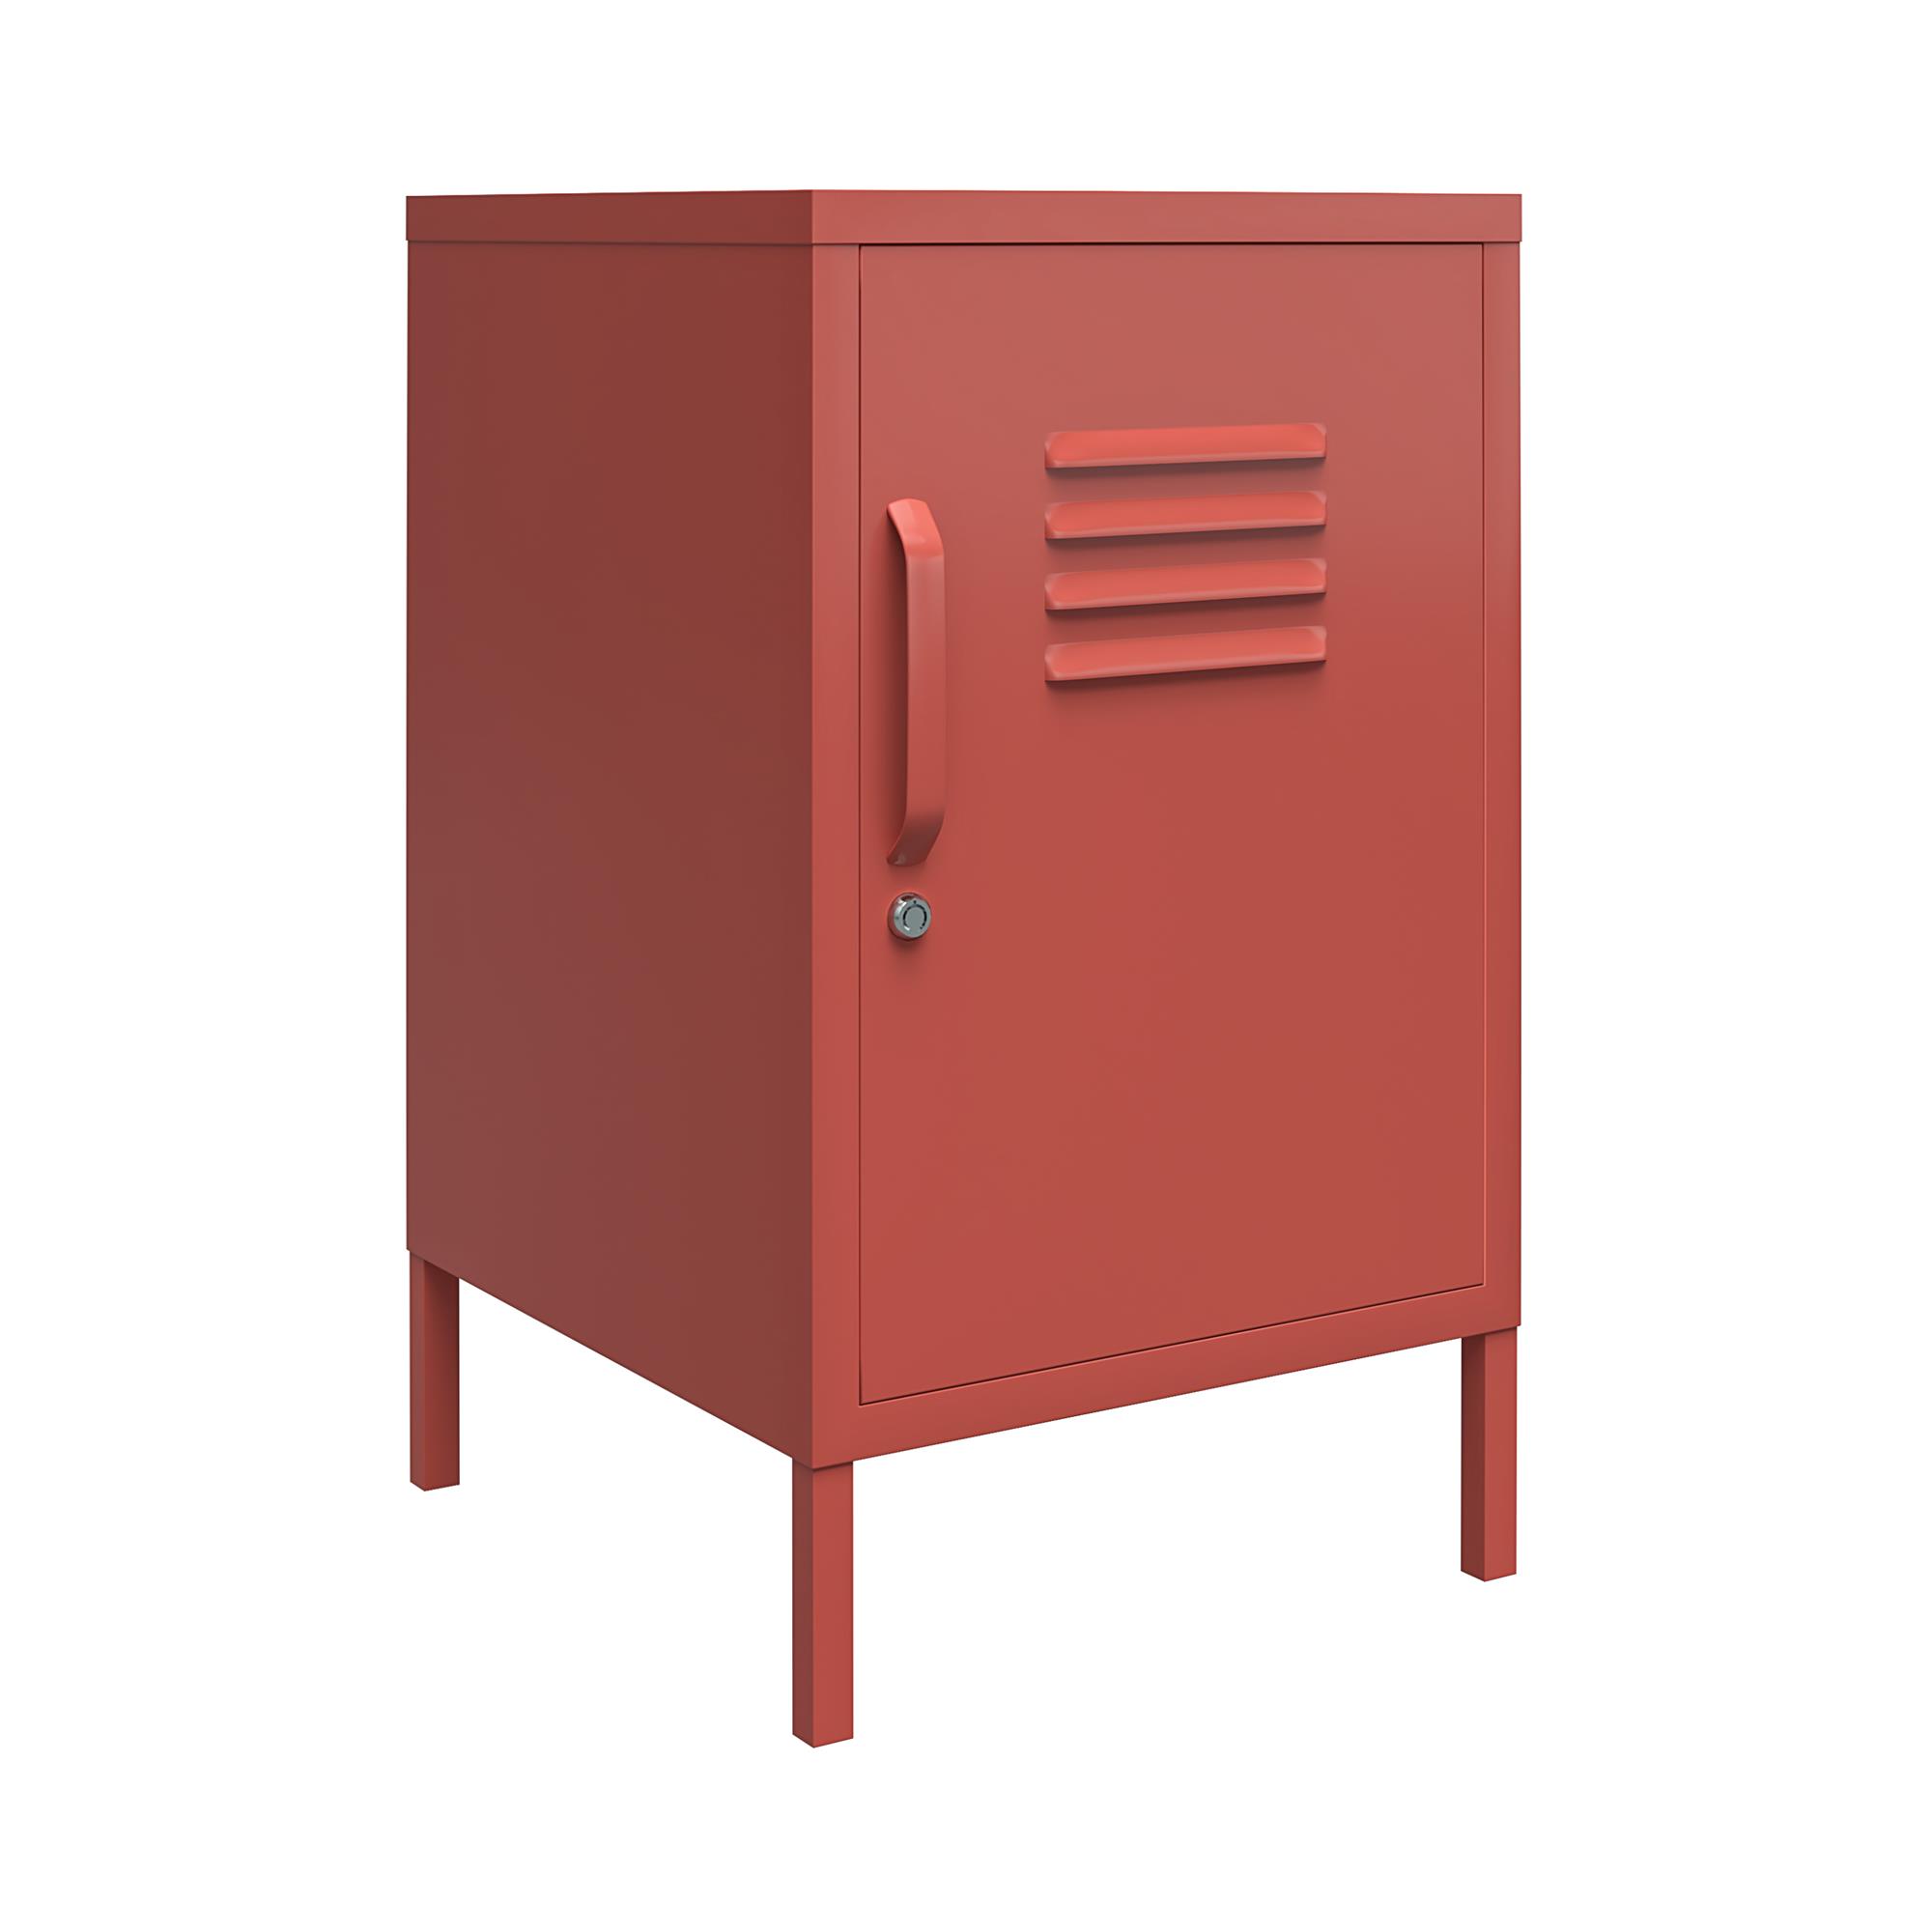 Details about   Metal Storage Cabinet Side Table with Shelves Small Space Saver Locker White 